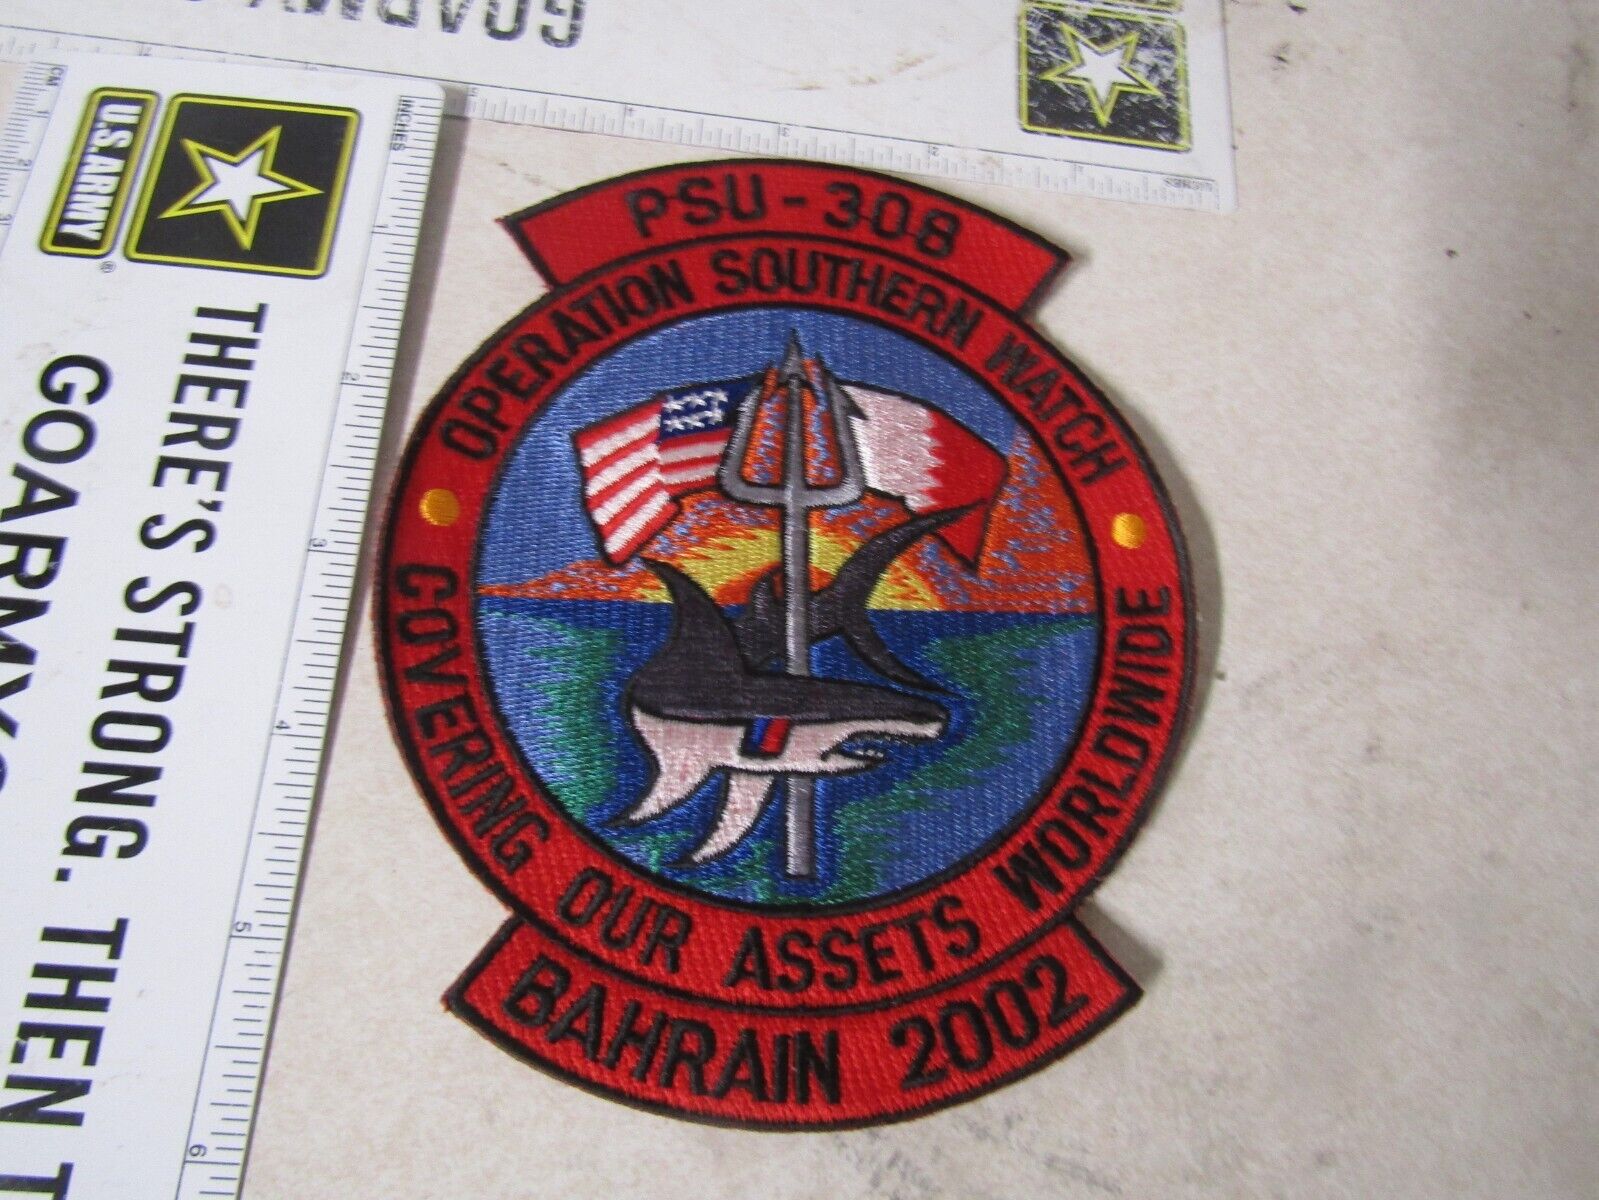 MILITARY PATCH VINTAGE OPERATION SOUTHERN WATCH BAHRAIN 2002 PSU-308 WORLDWIDE